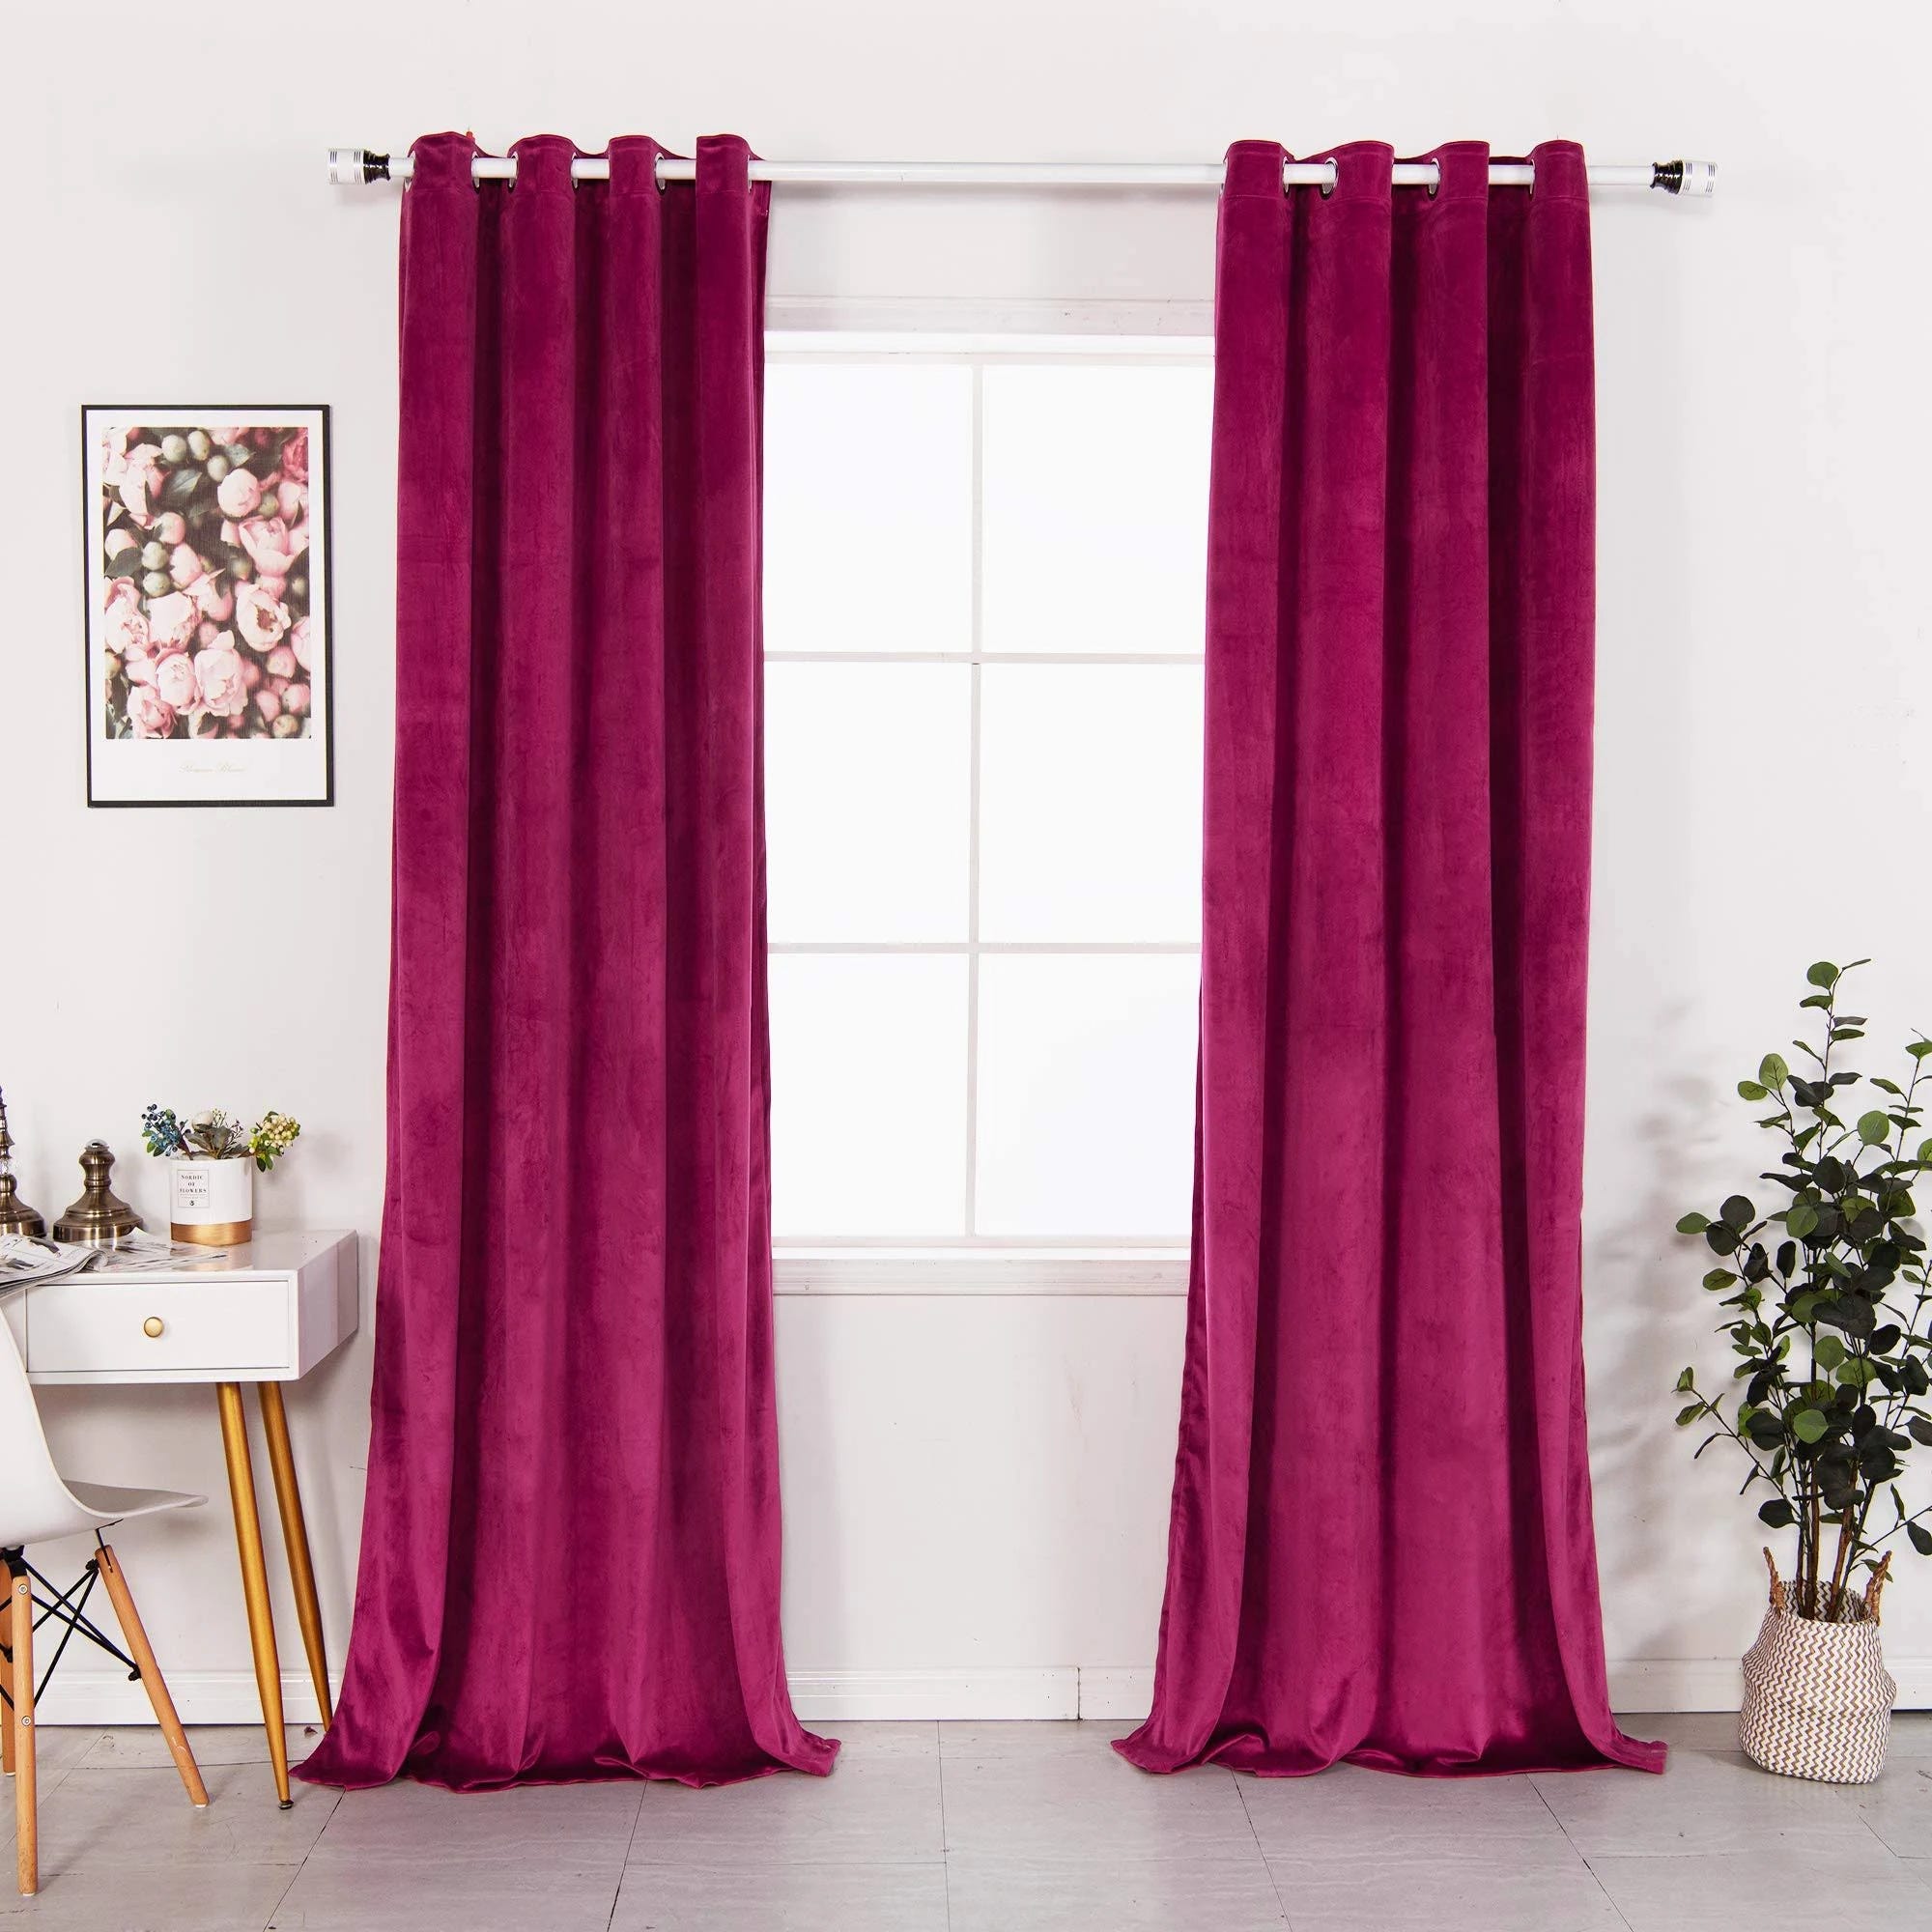 Luxury Red Velvet Curtains: High-Quality Soft Panels for Room Darkening and Insulation | Image